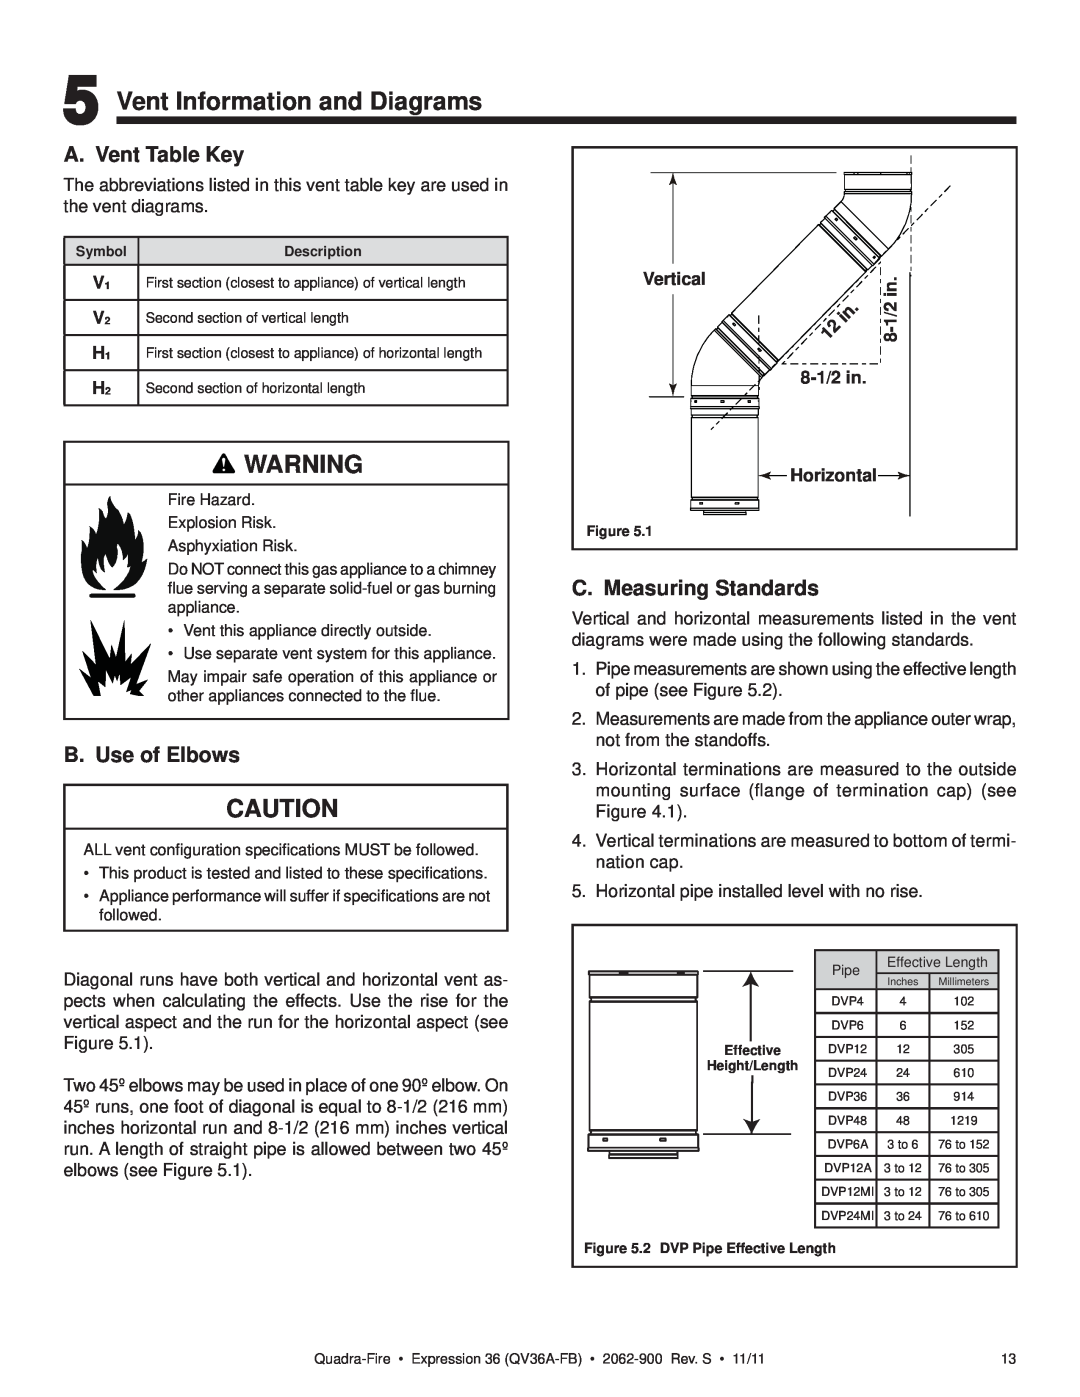 Quadra-Fire QV36A-FB Vent Information and Diagrams, A. Vent Table Key, C. Measuring Standards, B. Use of Elbows, Vertical 